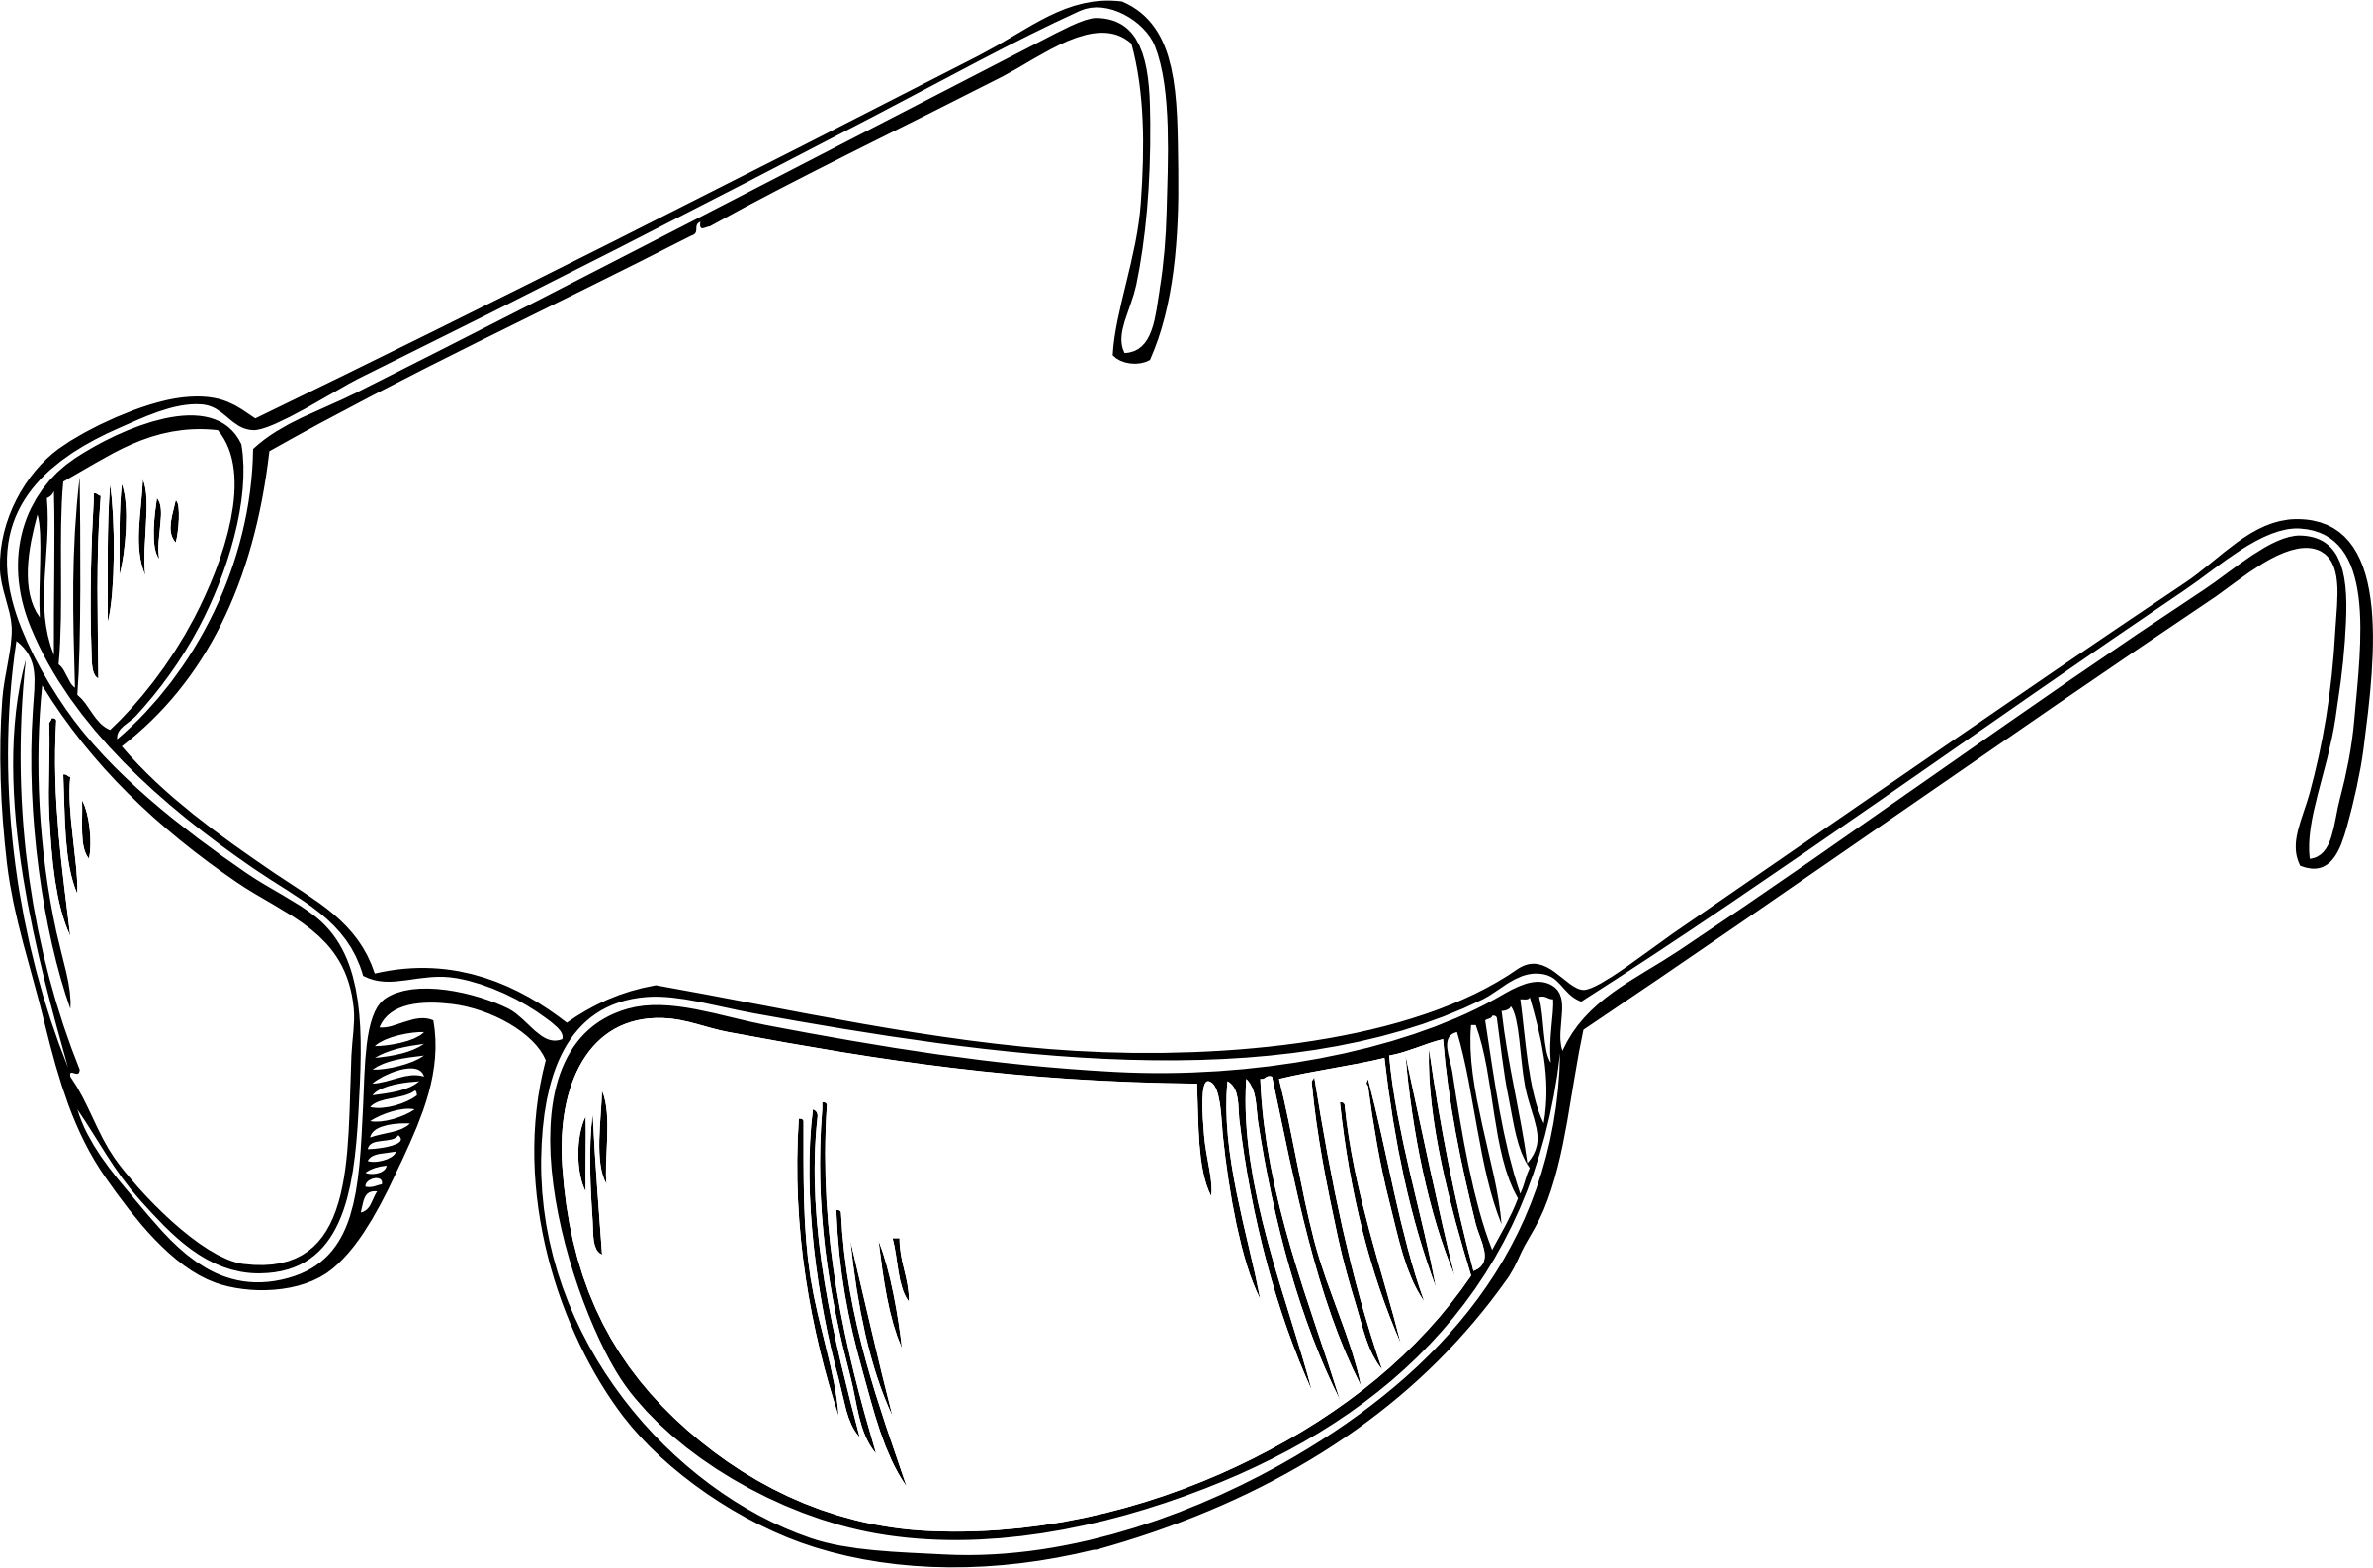 Pair Of Eyes Coloring Page Download - Outline Images Of Sunglasses (2400x1586)